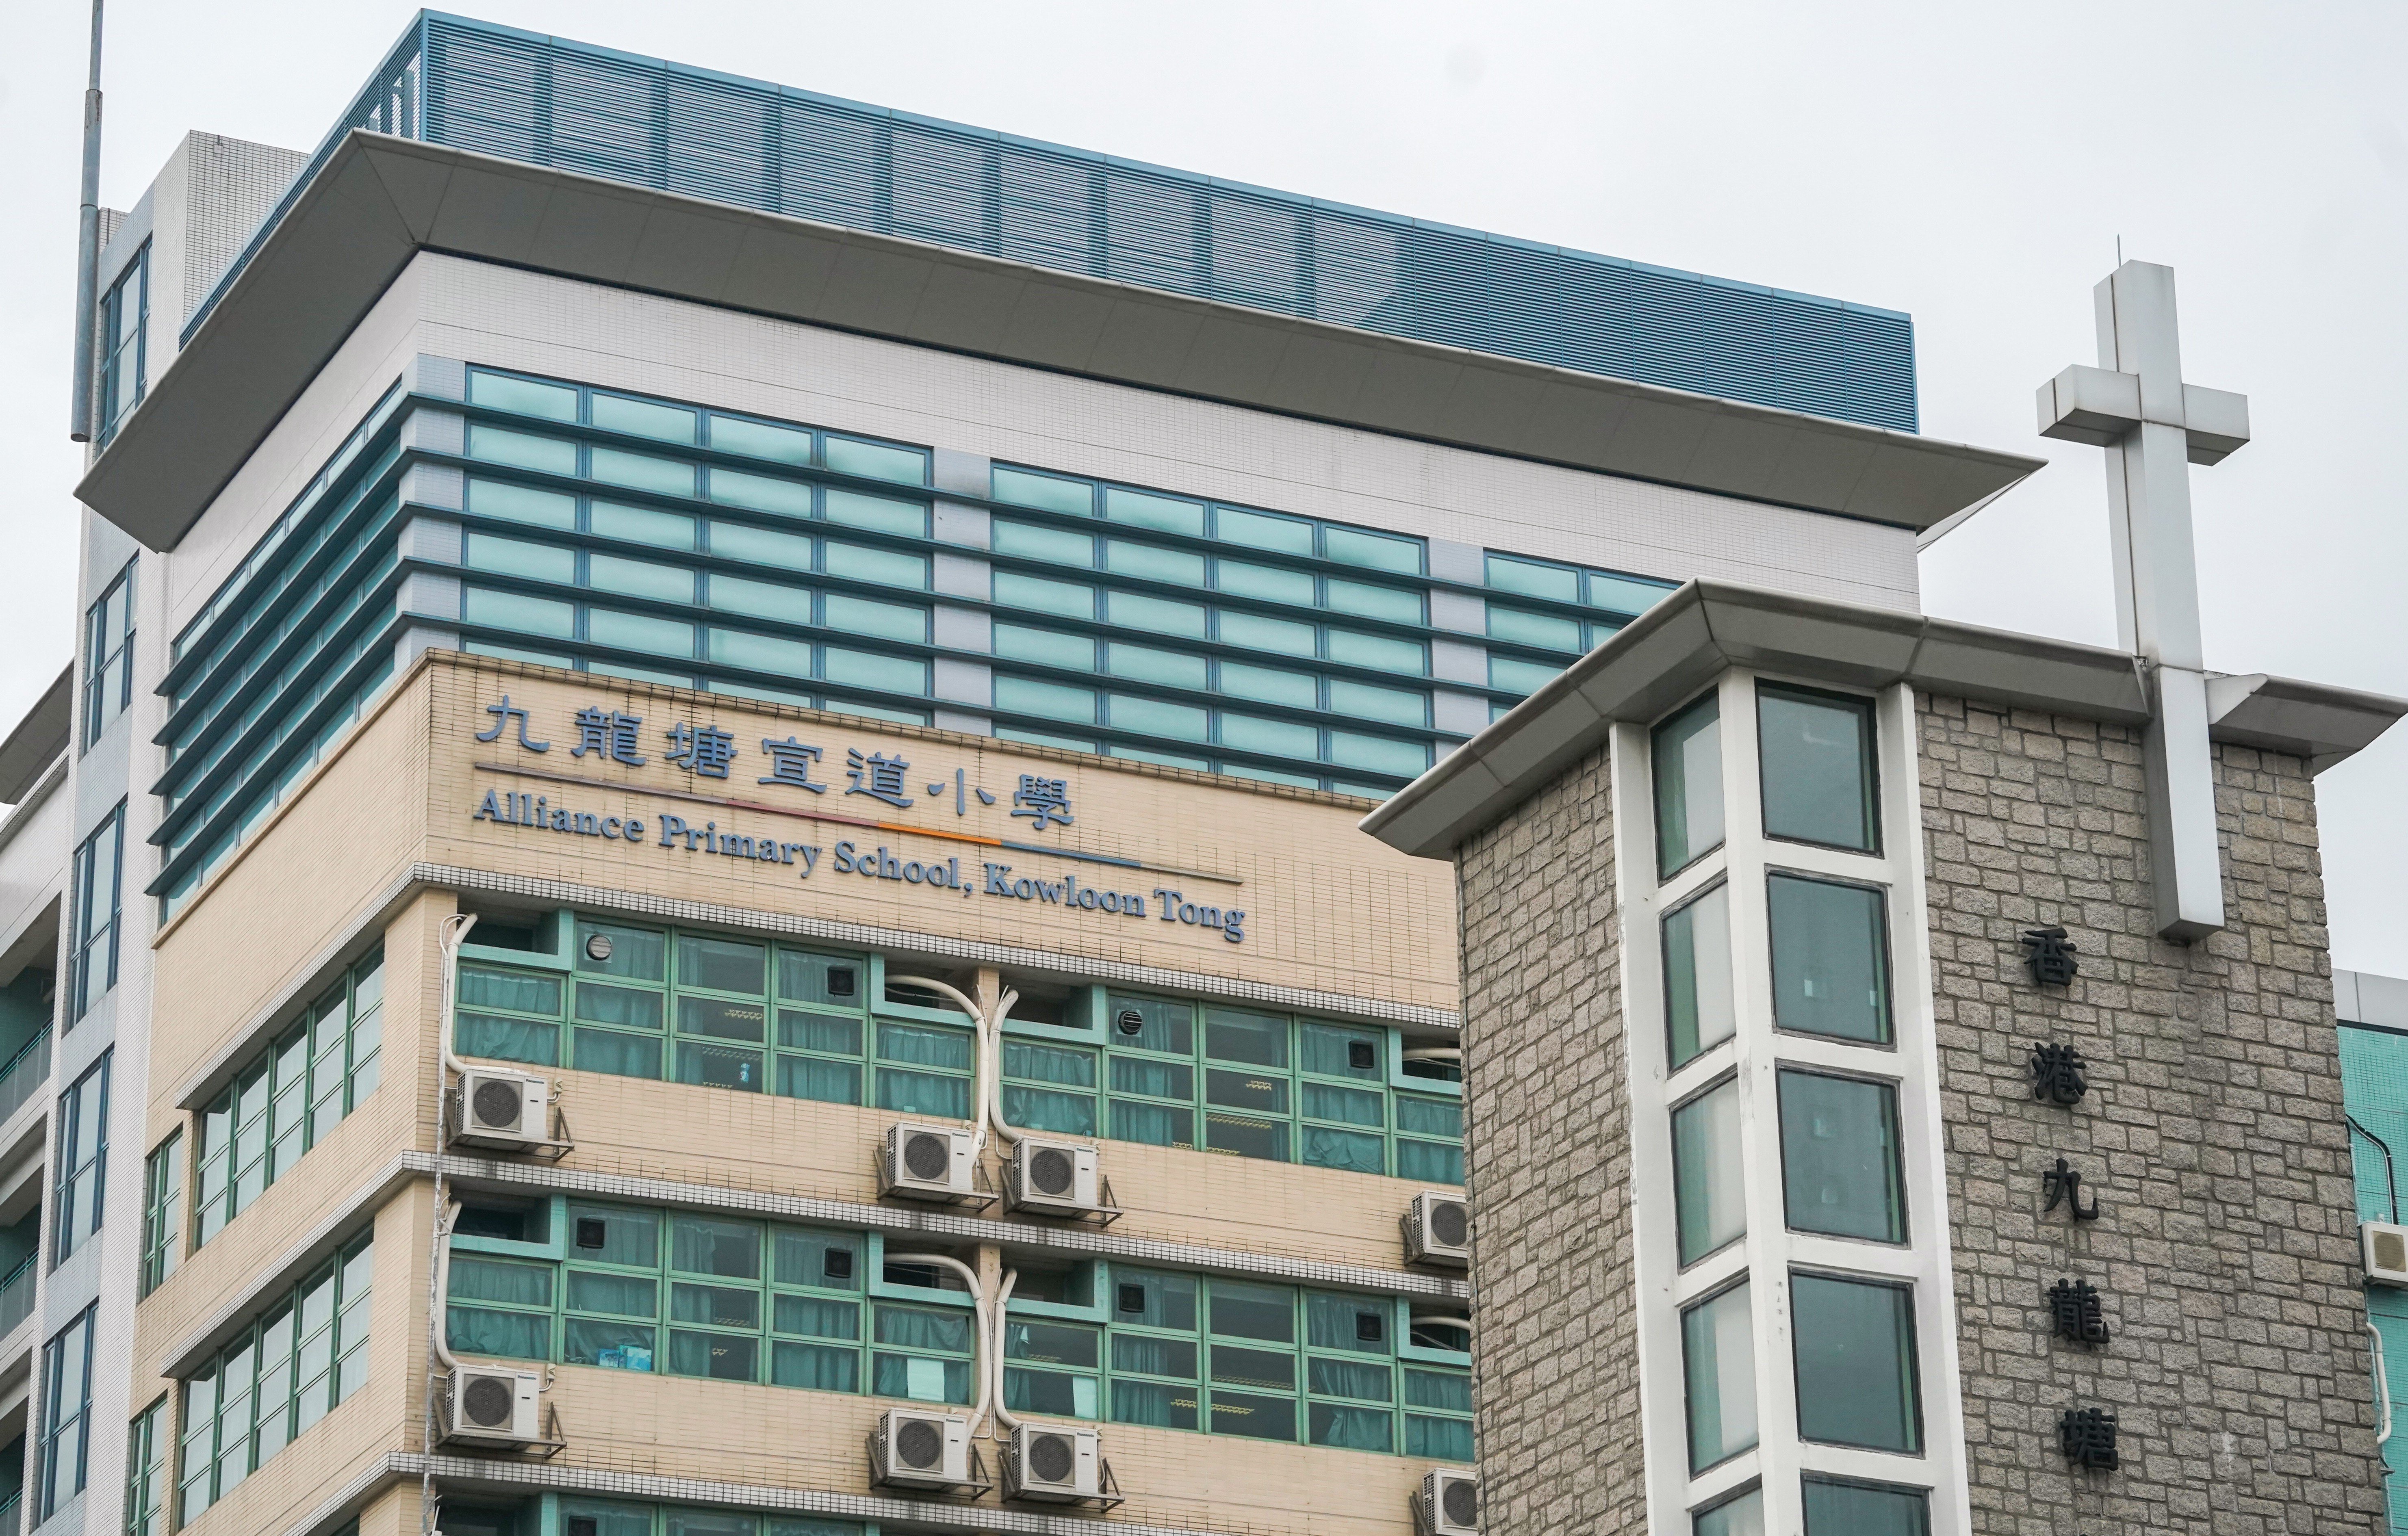 A teacher at Alliance Primary School in Kowloon Tong was delisted by the Education Bureau last month over preparing ‘problematic’ study materials. Photo: Felix Wong